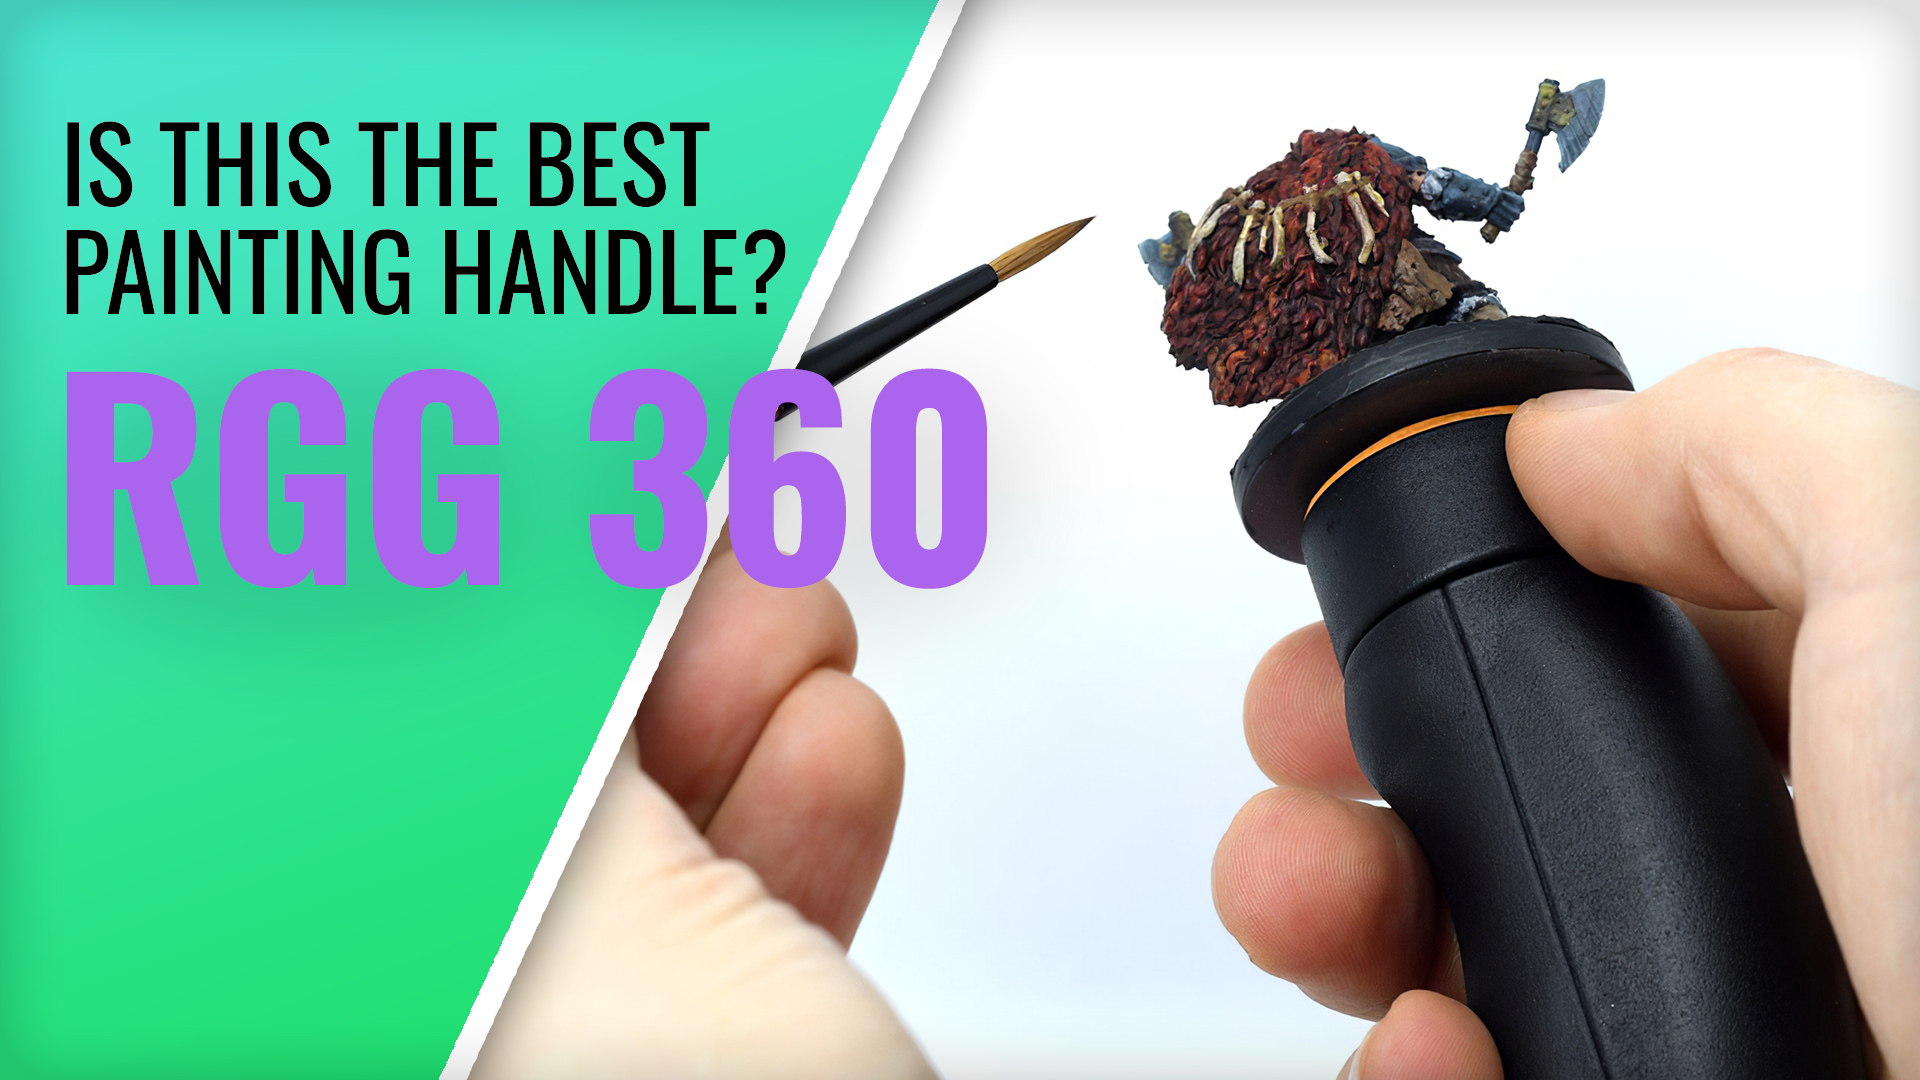 How Good Is The RGG 360 Painting Handle?